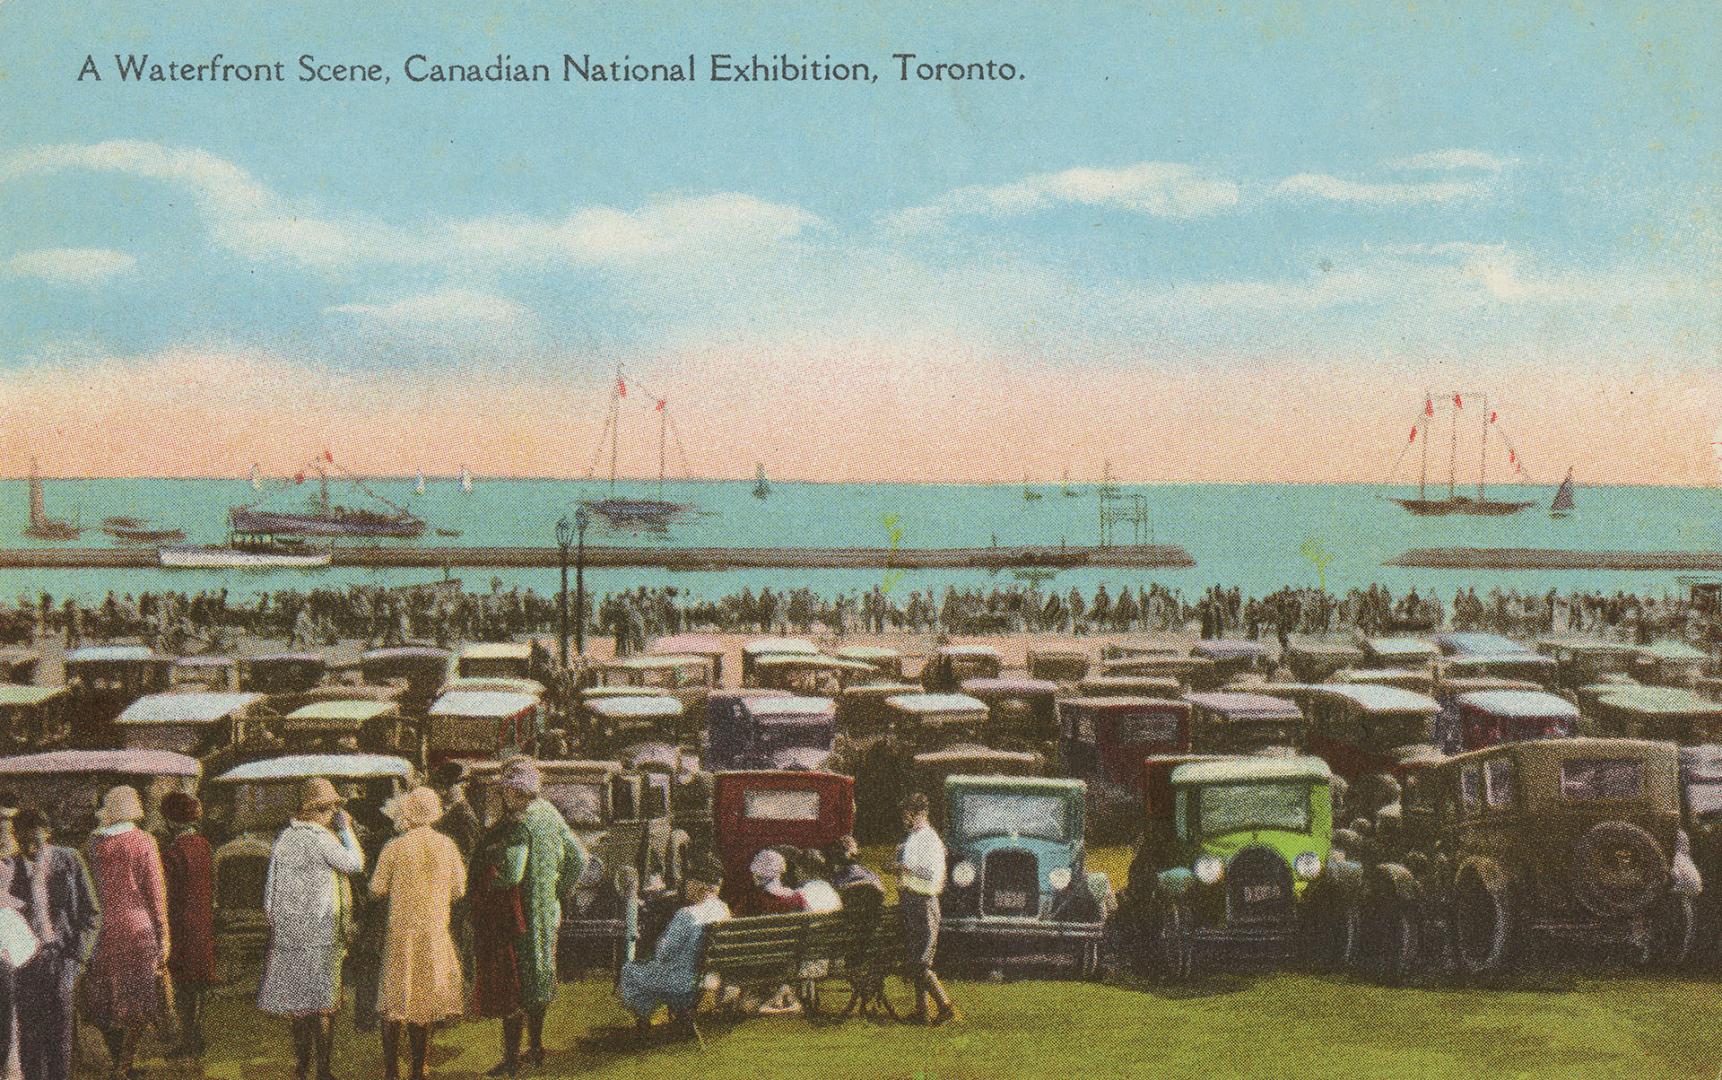 A Waterfront Scene, Canadian National Exhibition, Toronto